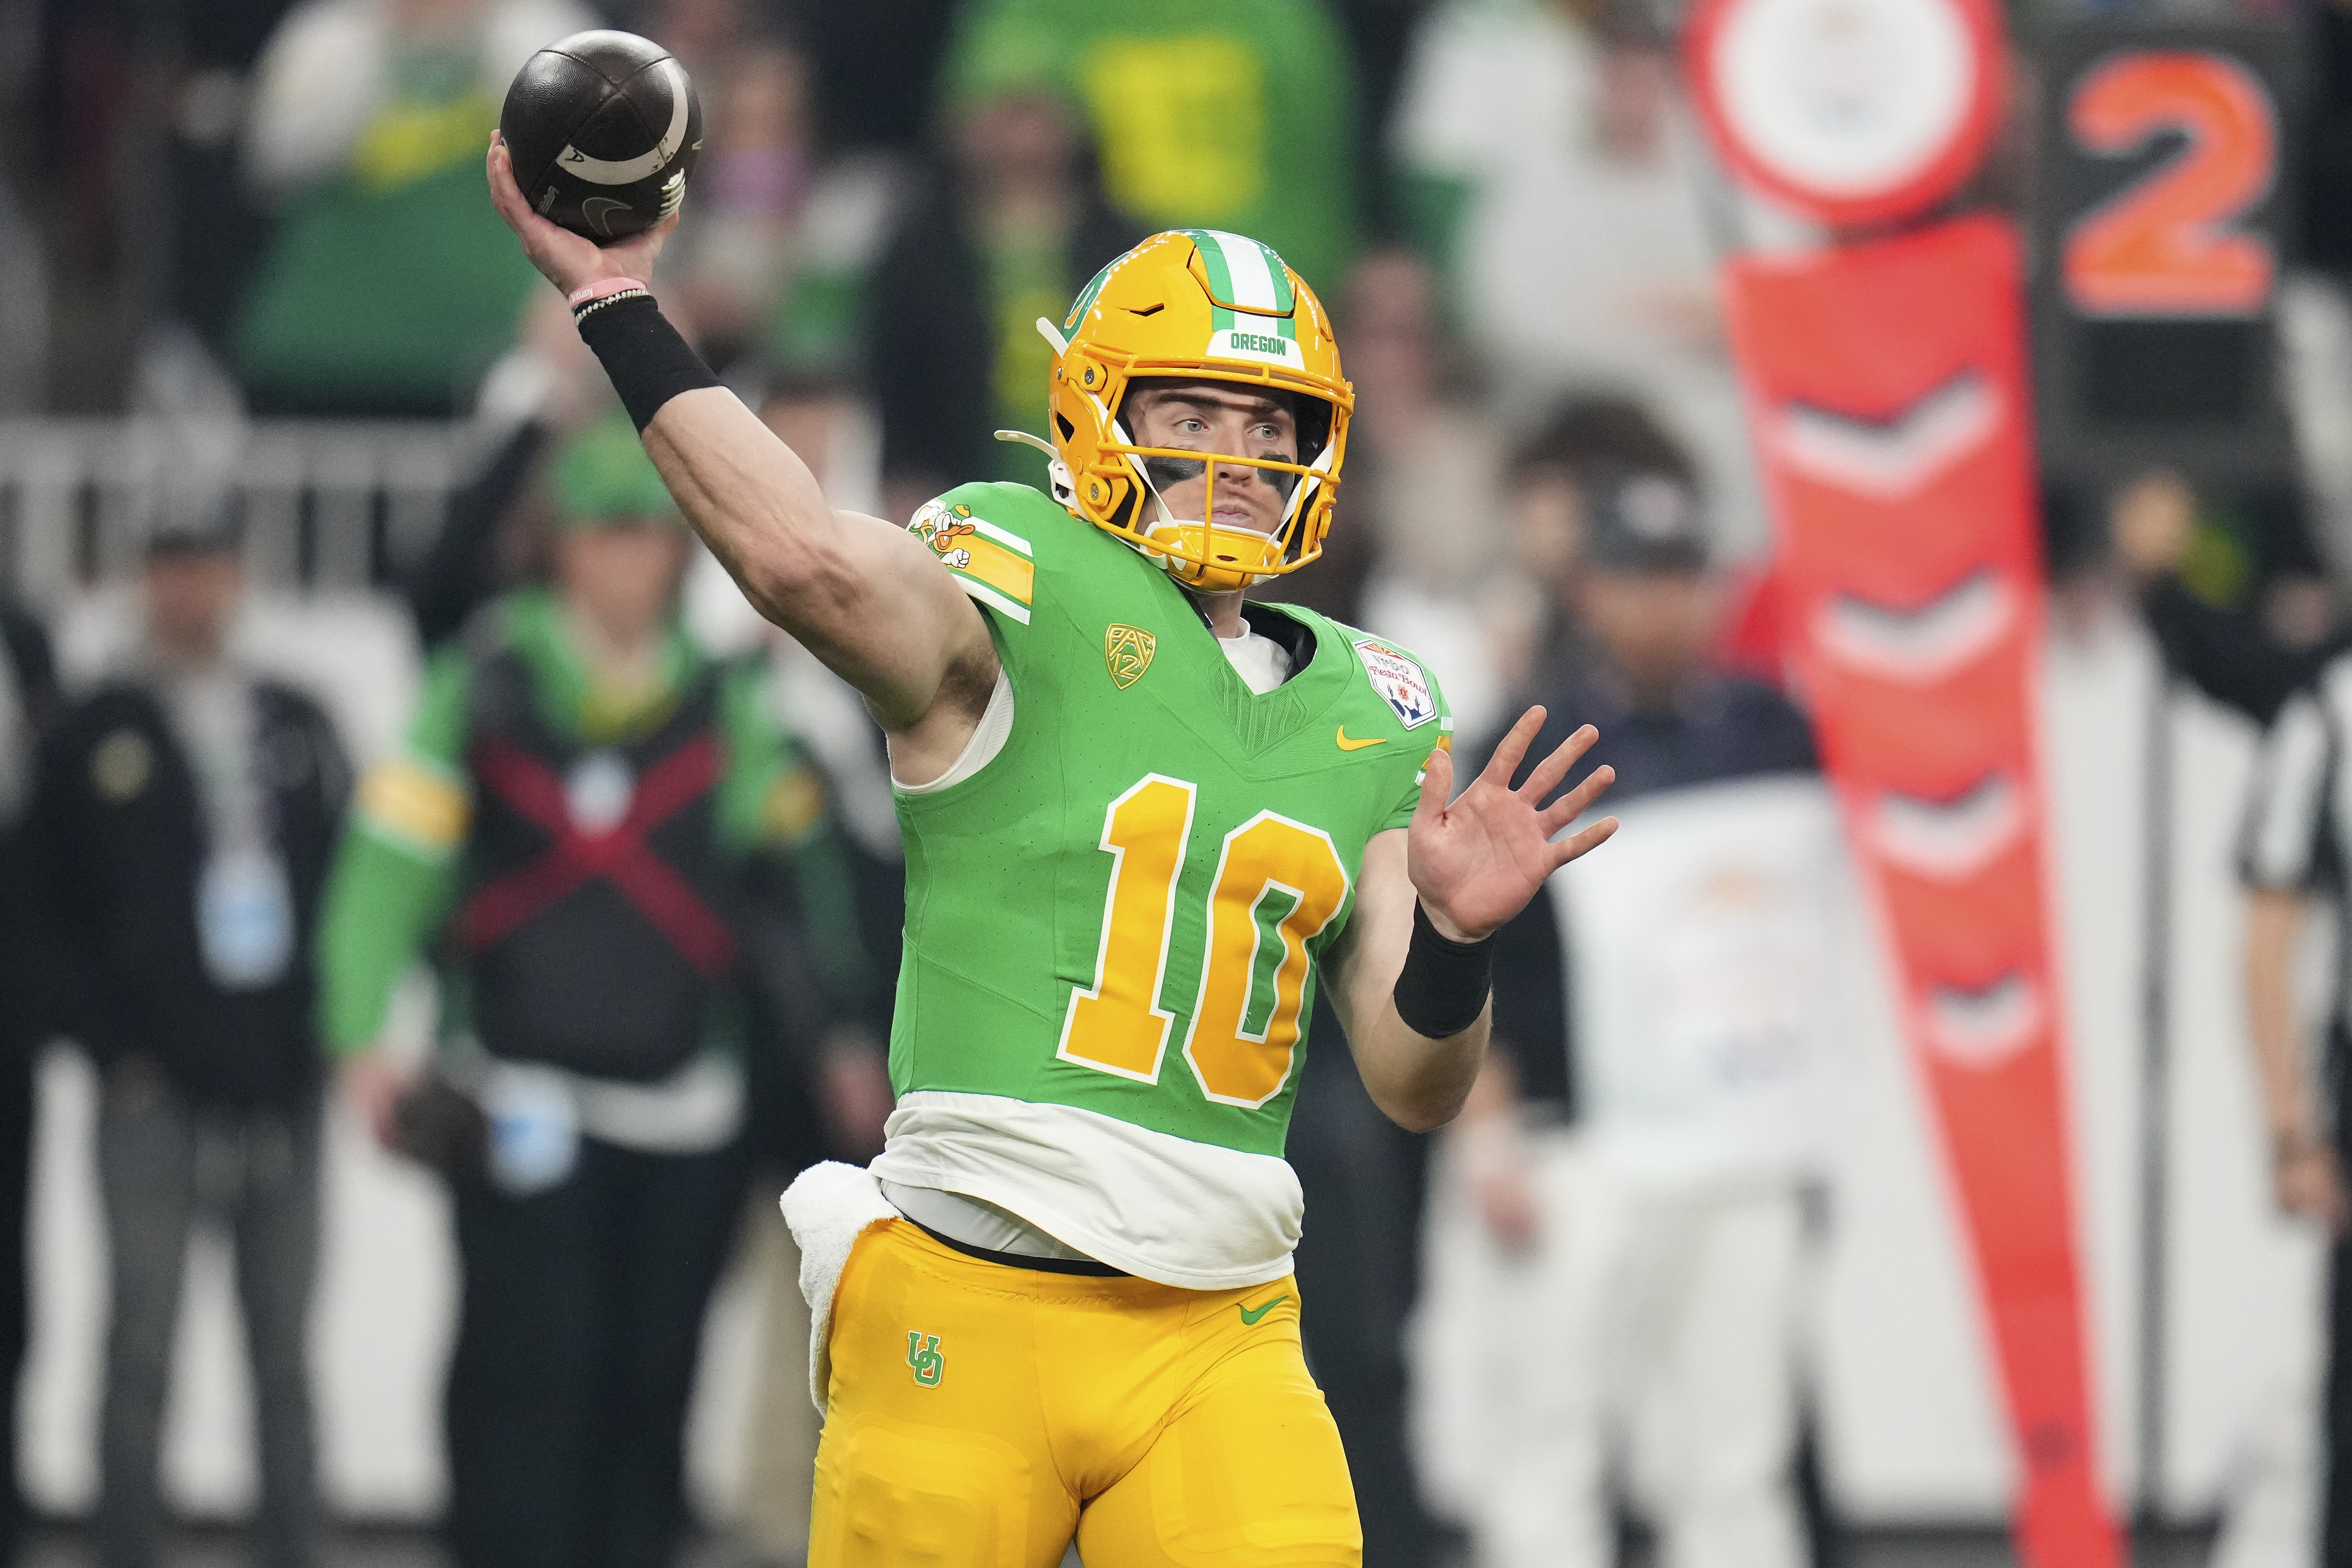 Oregon's Bo Nix ends 5-year college odyssey as one of most productive QBs  in NCAA history - OPB